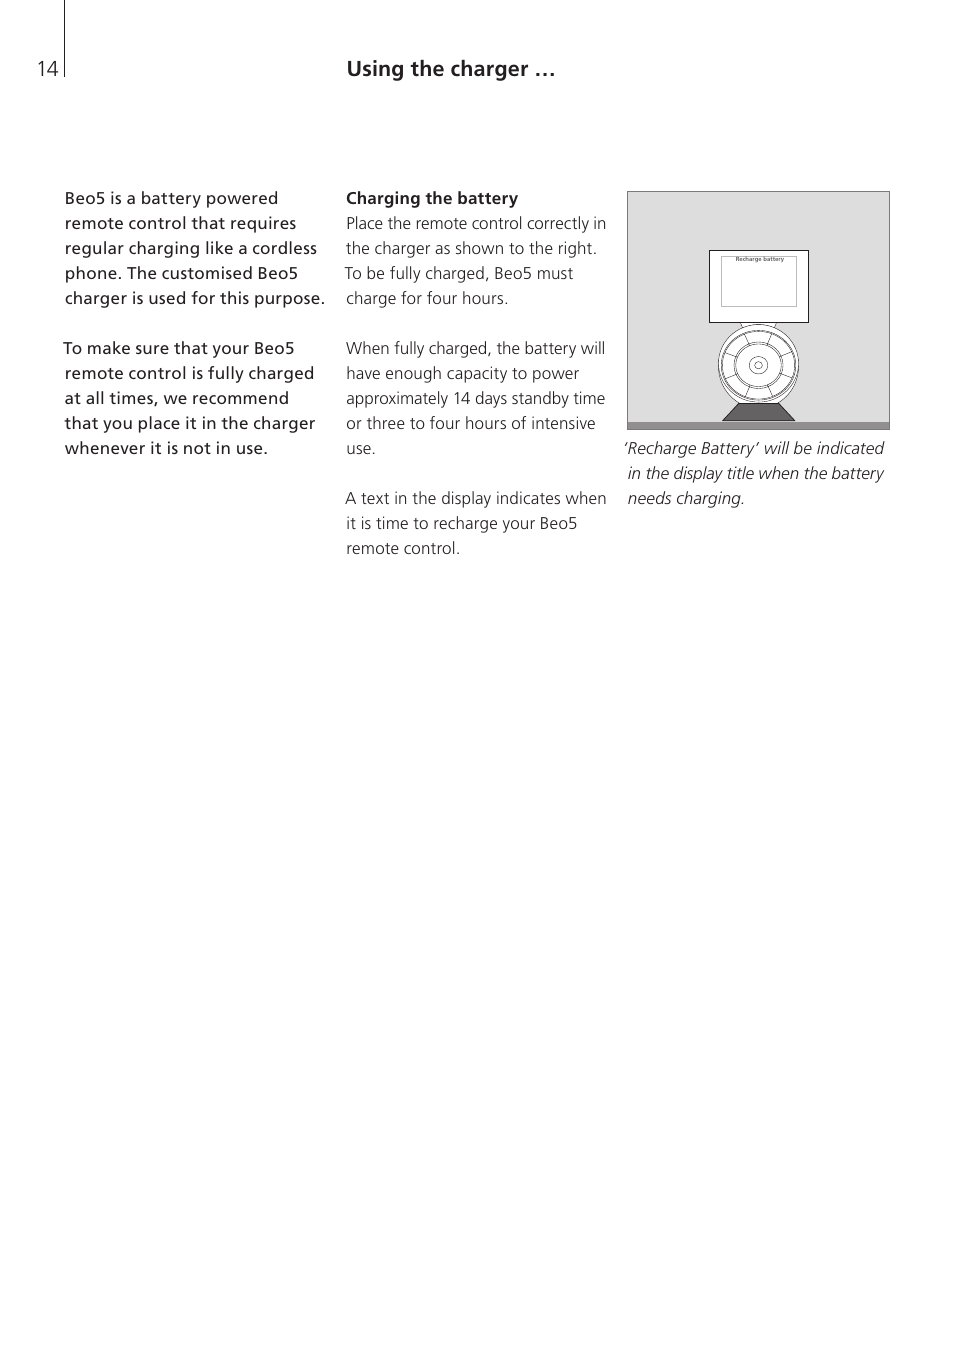 Using the charger, Charging the battery | Bang & Olufsen Beo5 - User Guide  User Manual | Page 14 / 24 | Original mode